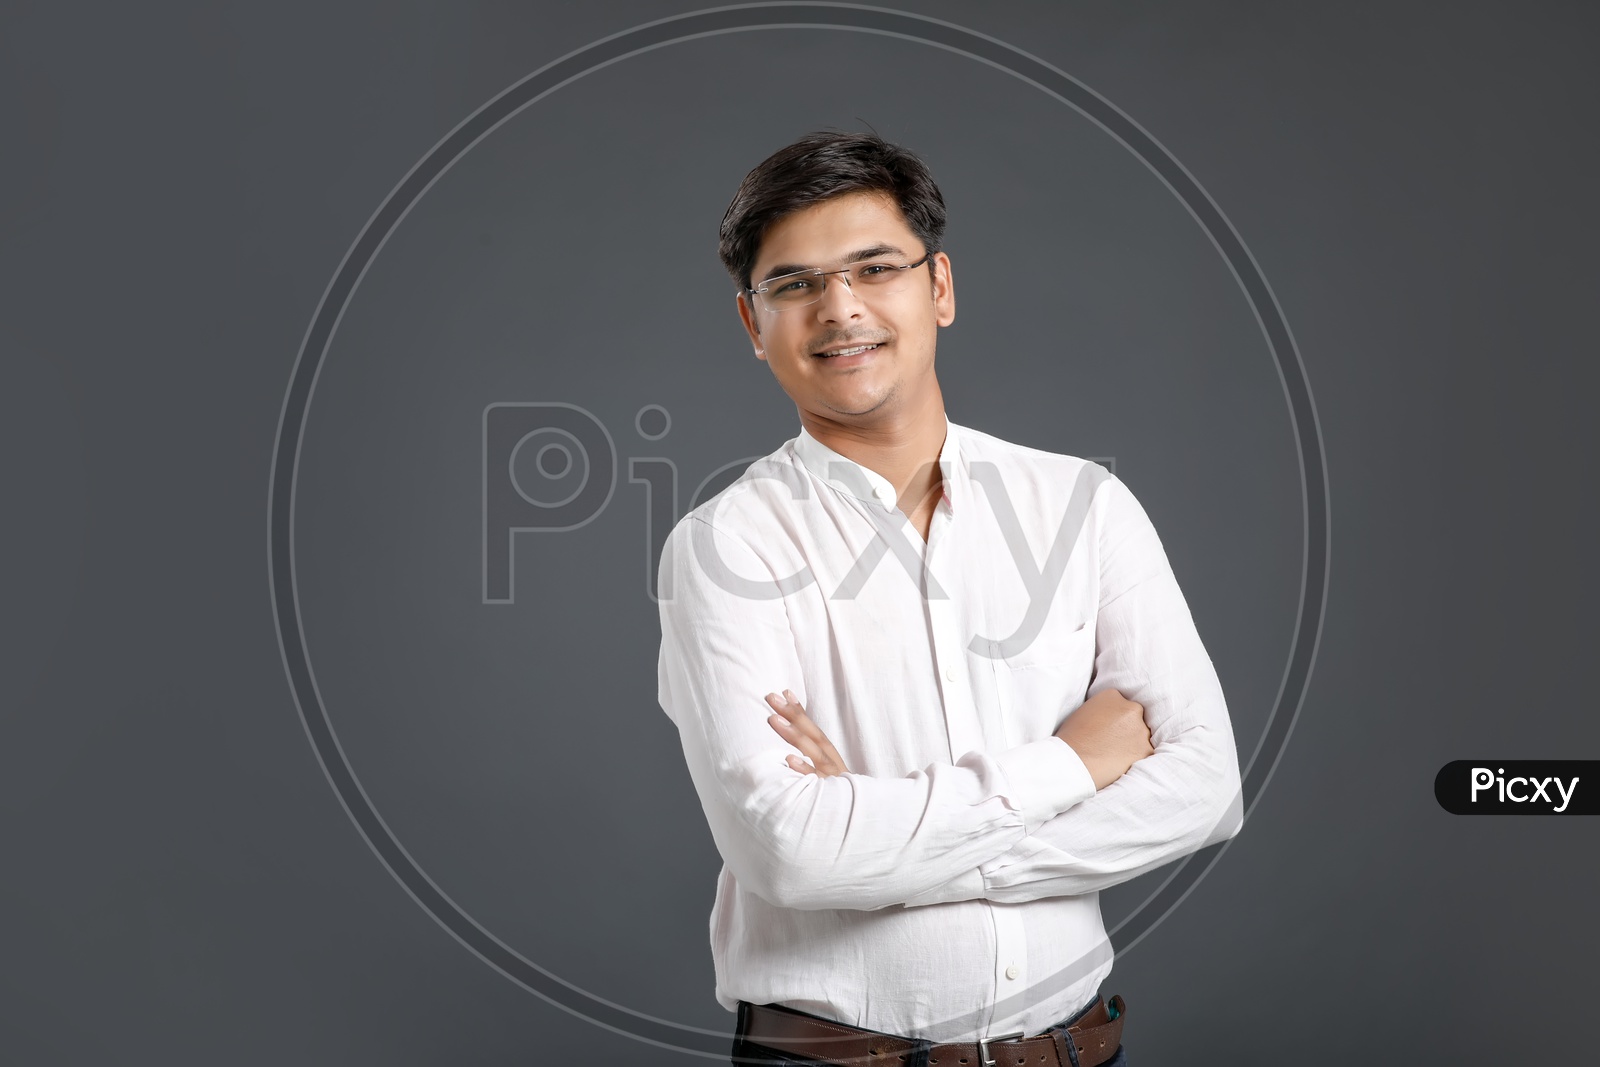 Young Man or Indian Man Happily Smiling  and Posing Over an Isolated Black Background